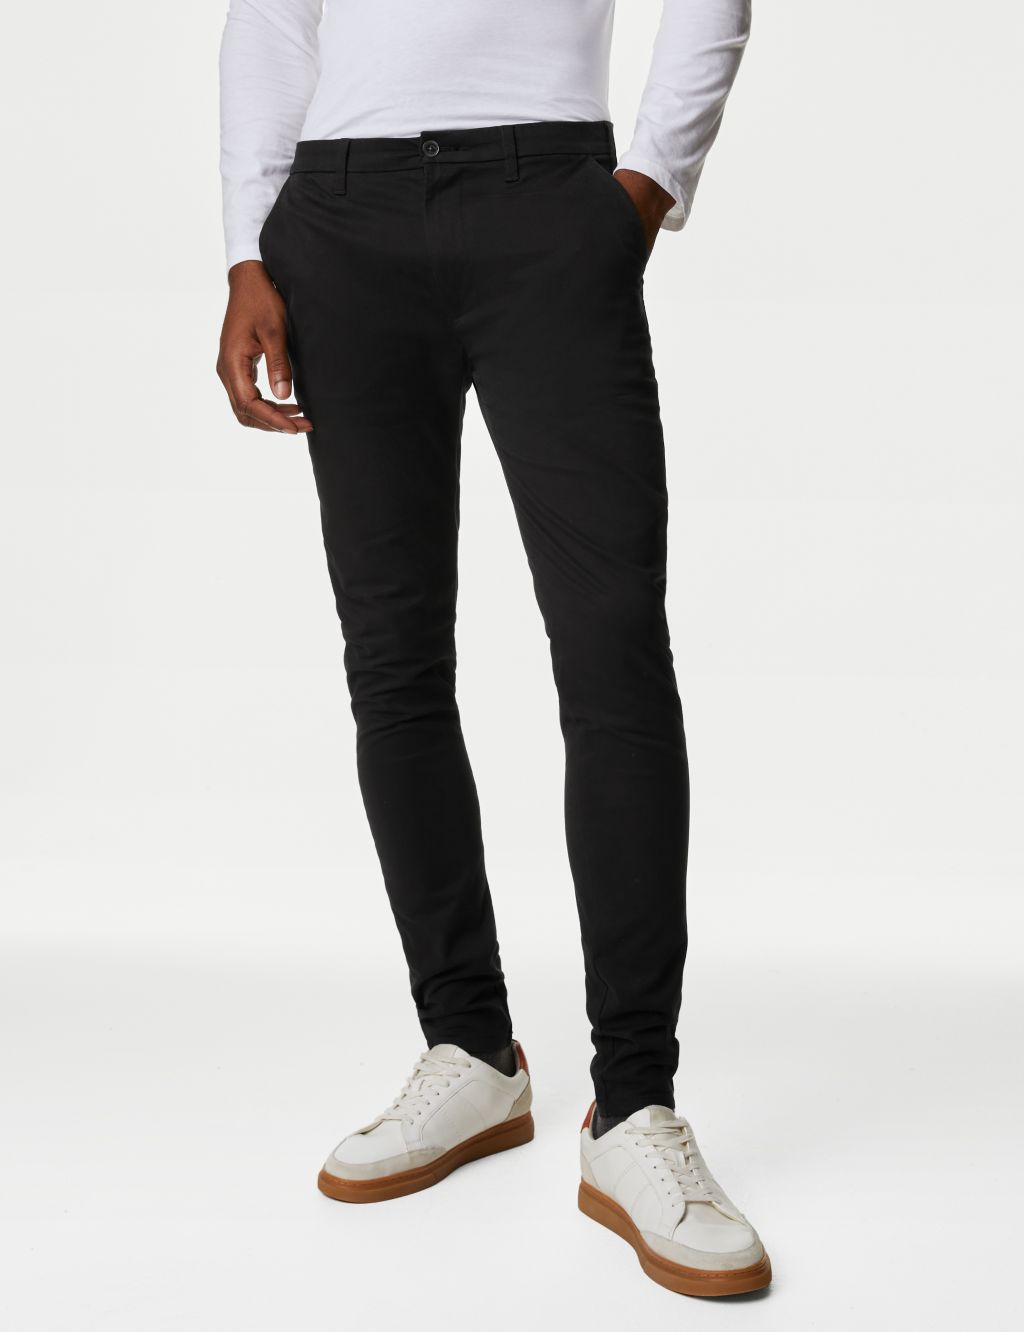 Skinny Fit Stretch Chinos image 1